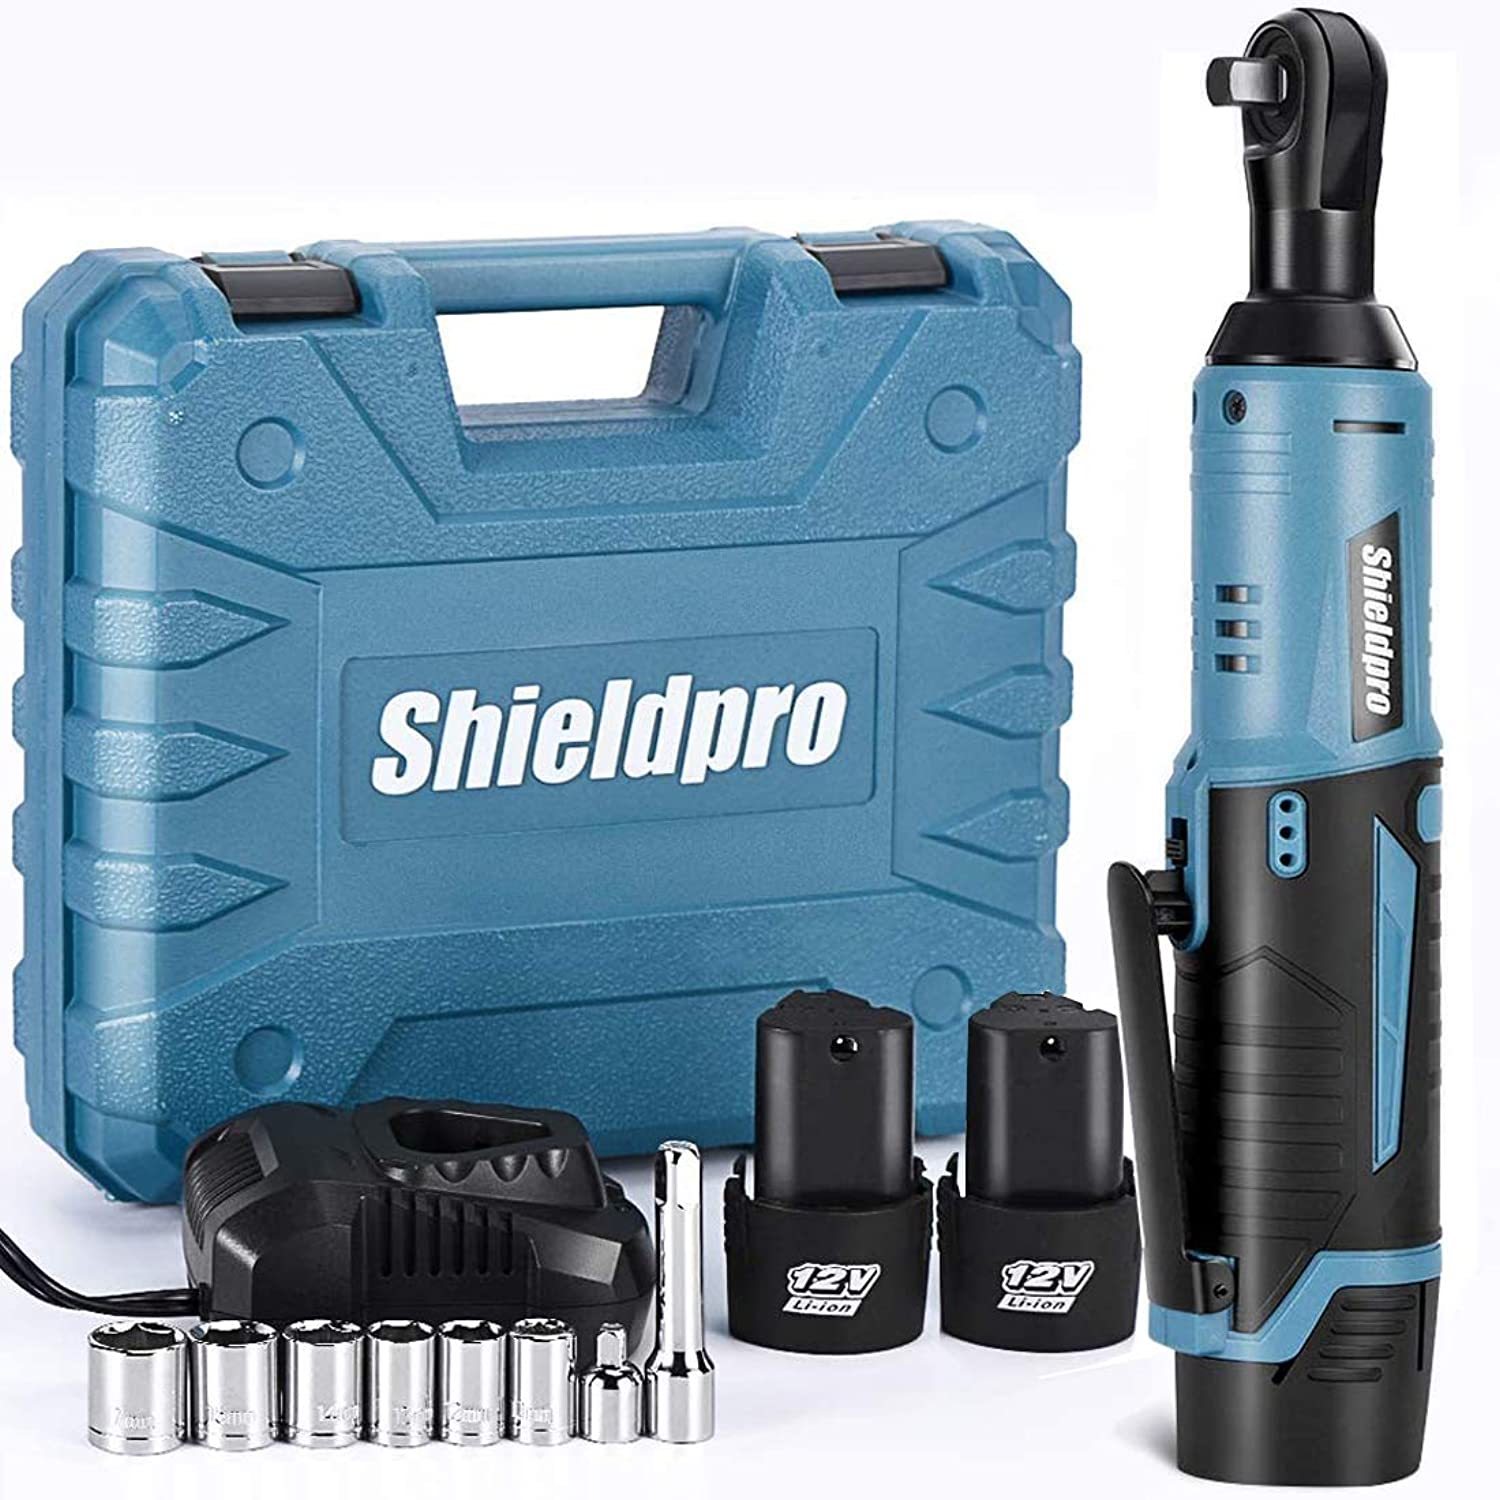 2 Battery US Details about   3/8'' Cordless Electric Ratchet Wrench Impact Wrench Tool Set 12V 